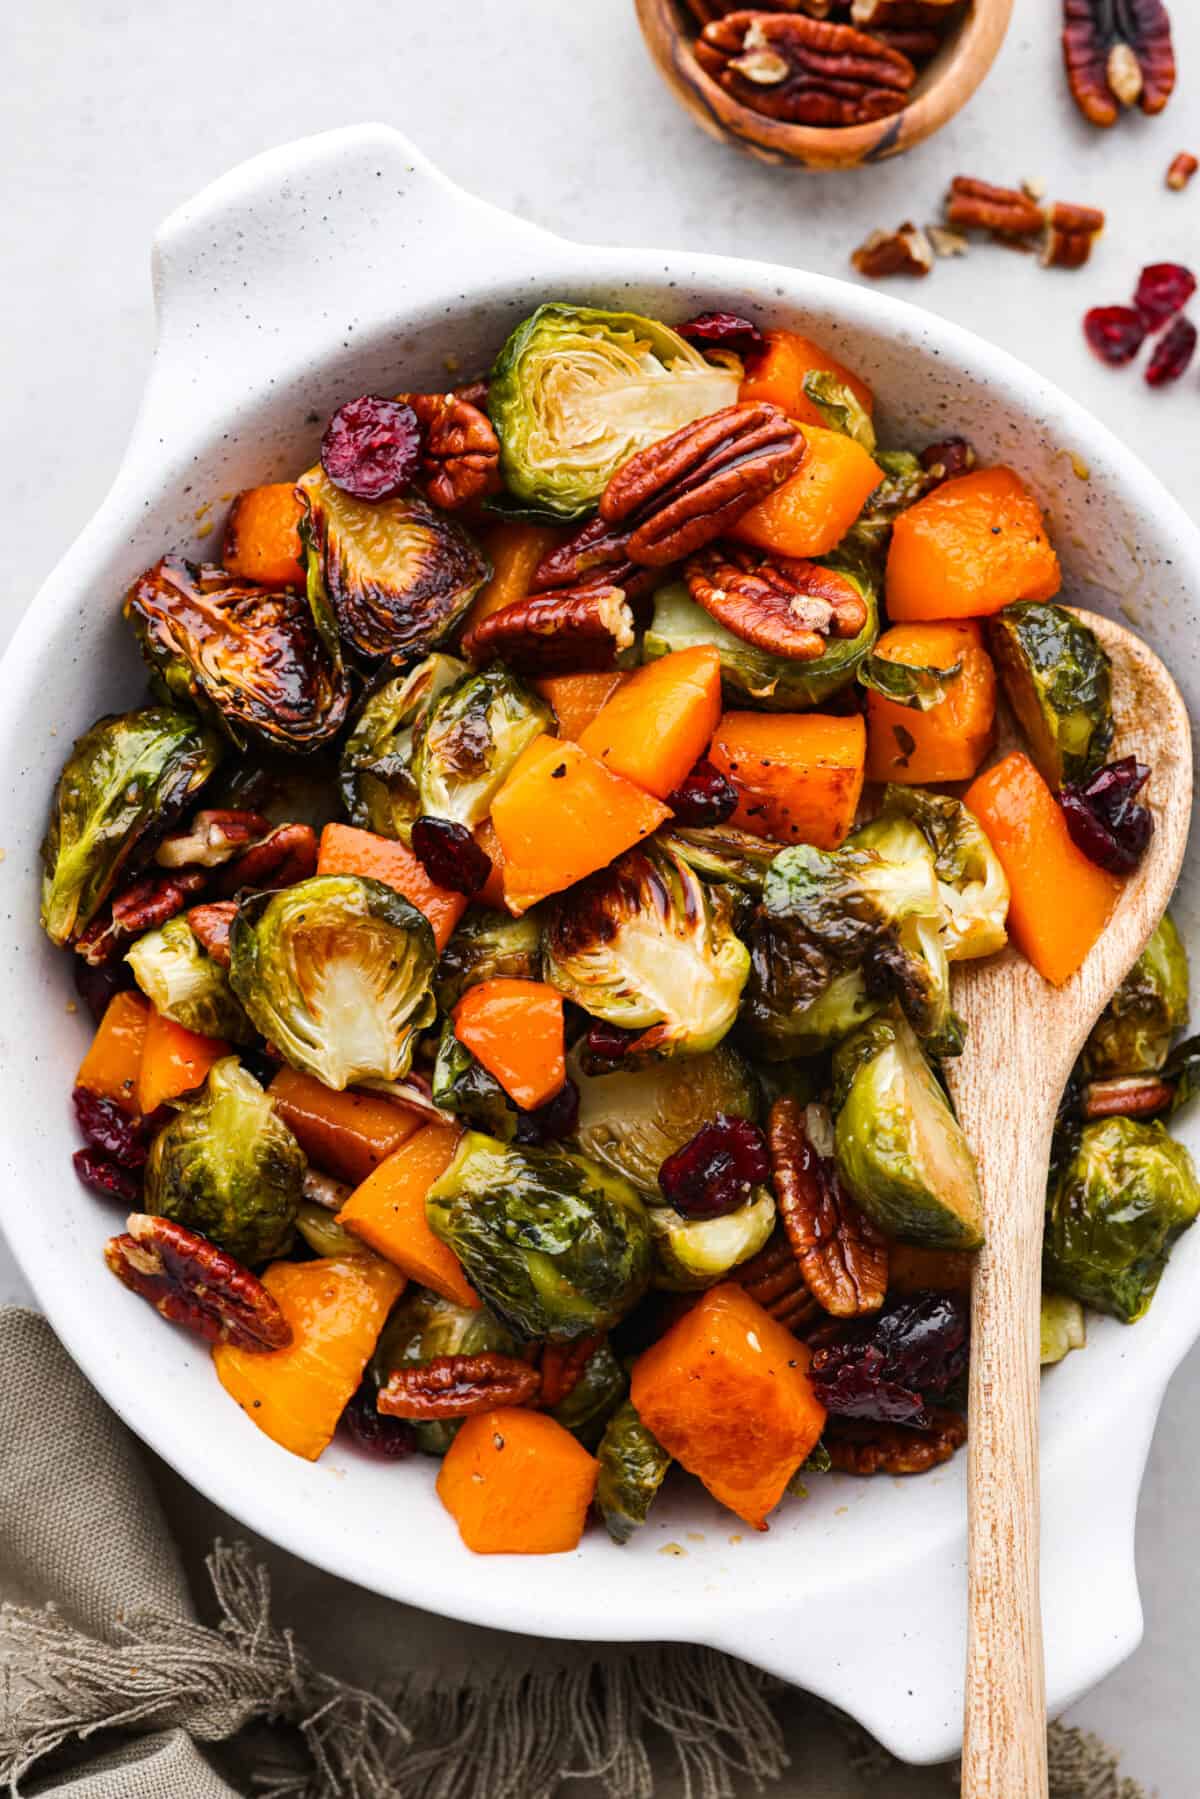 Squash, brussels sprouts, and pecans served in a white baking dish.